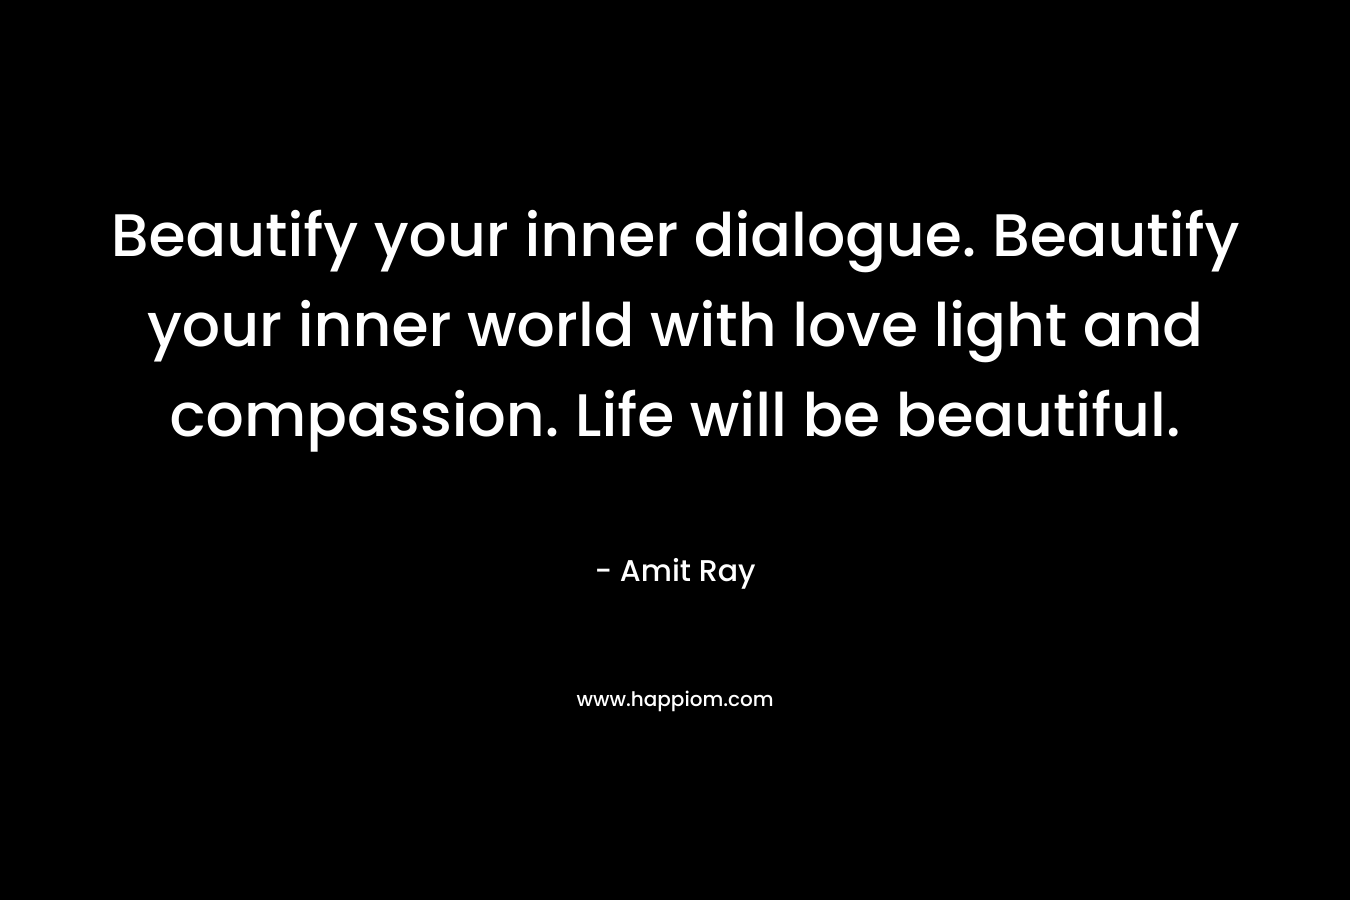 Beautify your inner dialogue. Beautify your inner world with love light and compassion. Life will be beautiful.